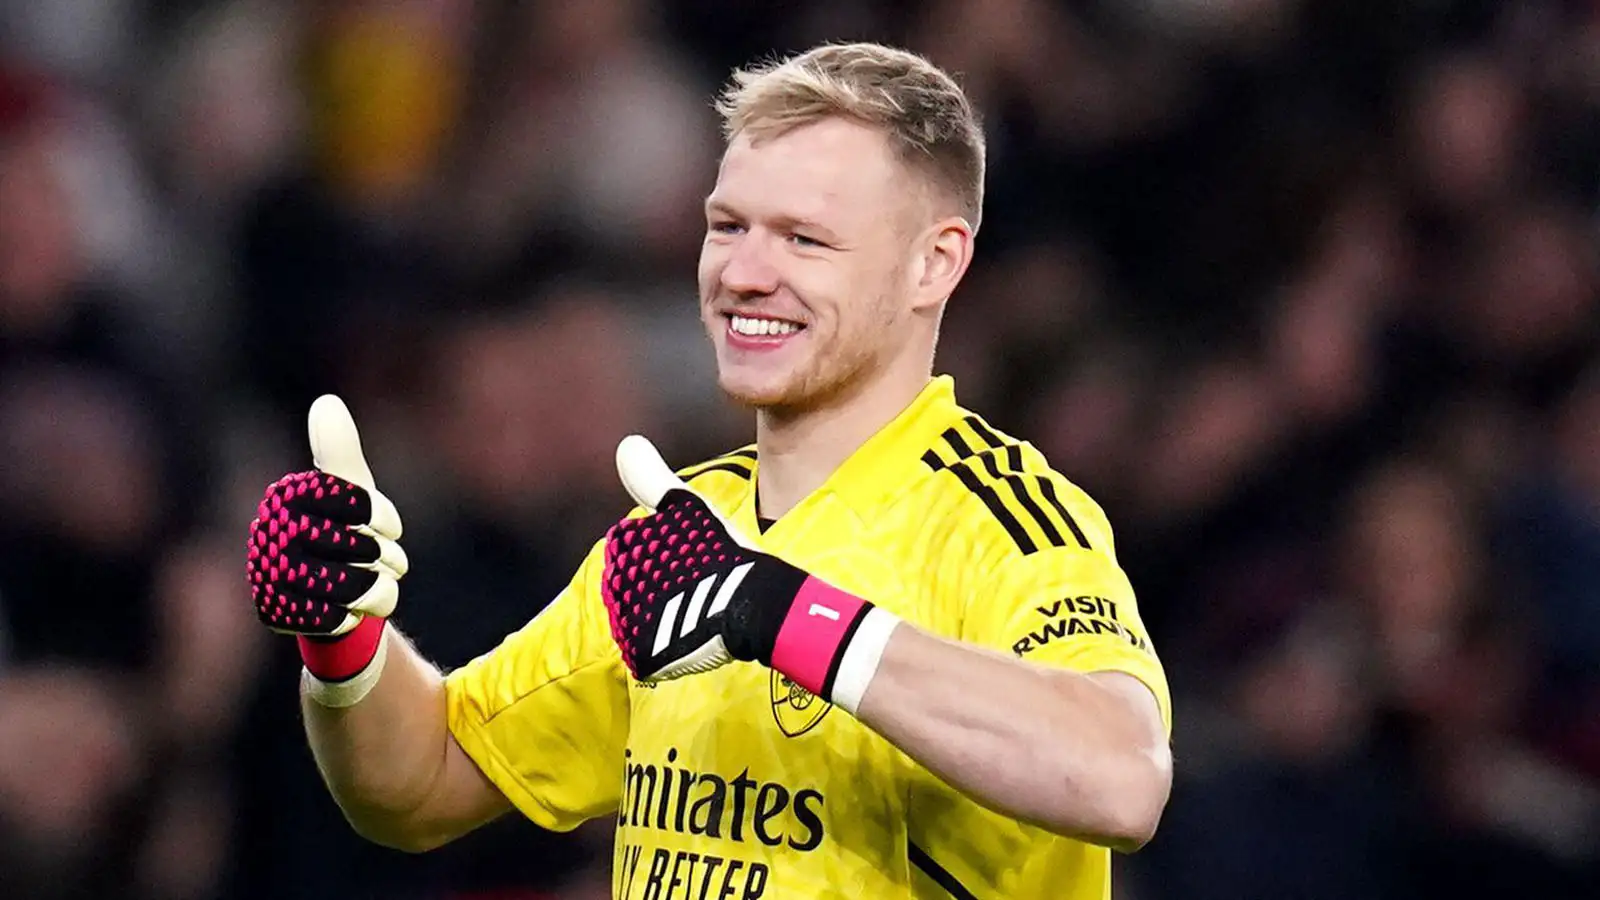 Arsenal goalkeeper Aaron Ramsdale reacts during the Premier League match at the Emirates Stadium, London.